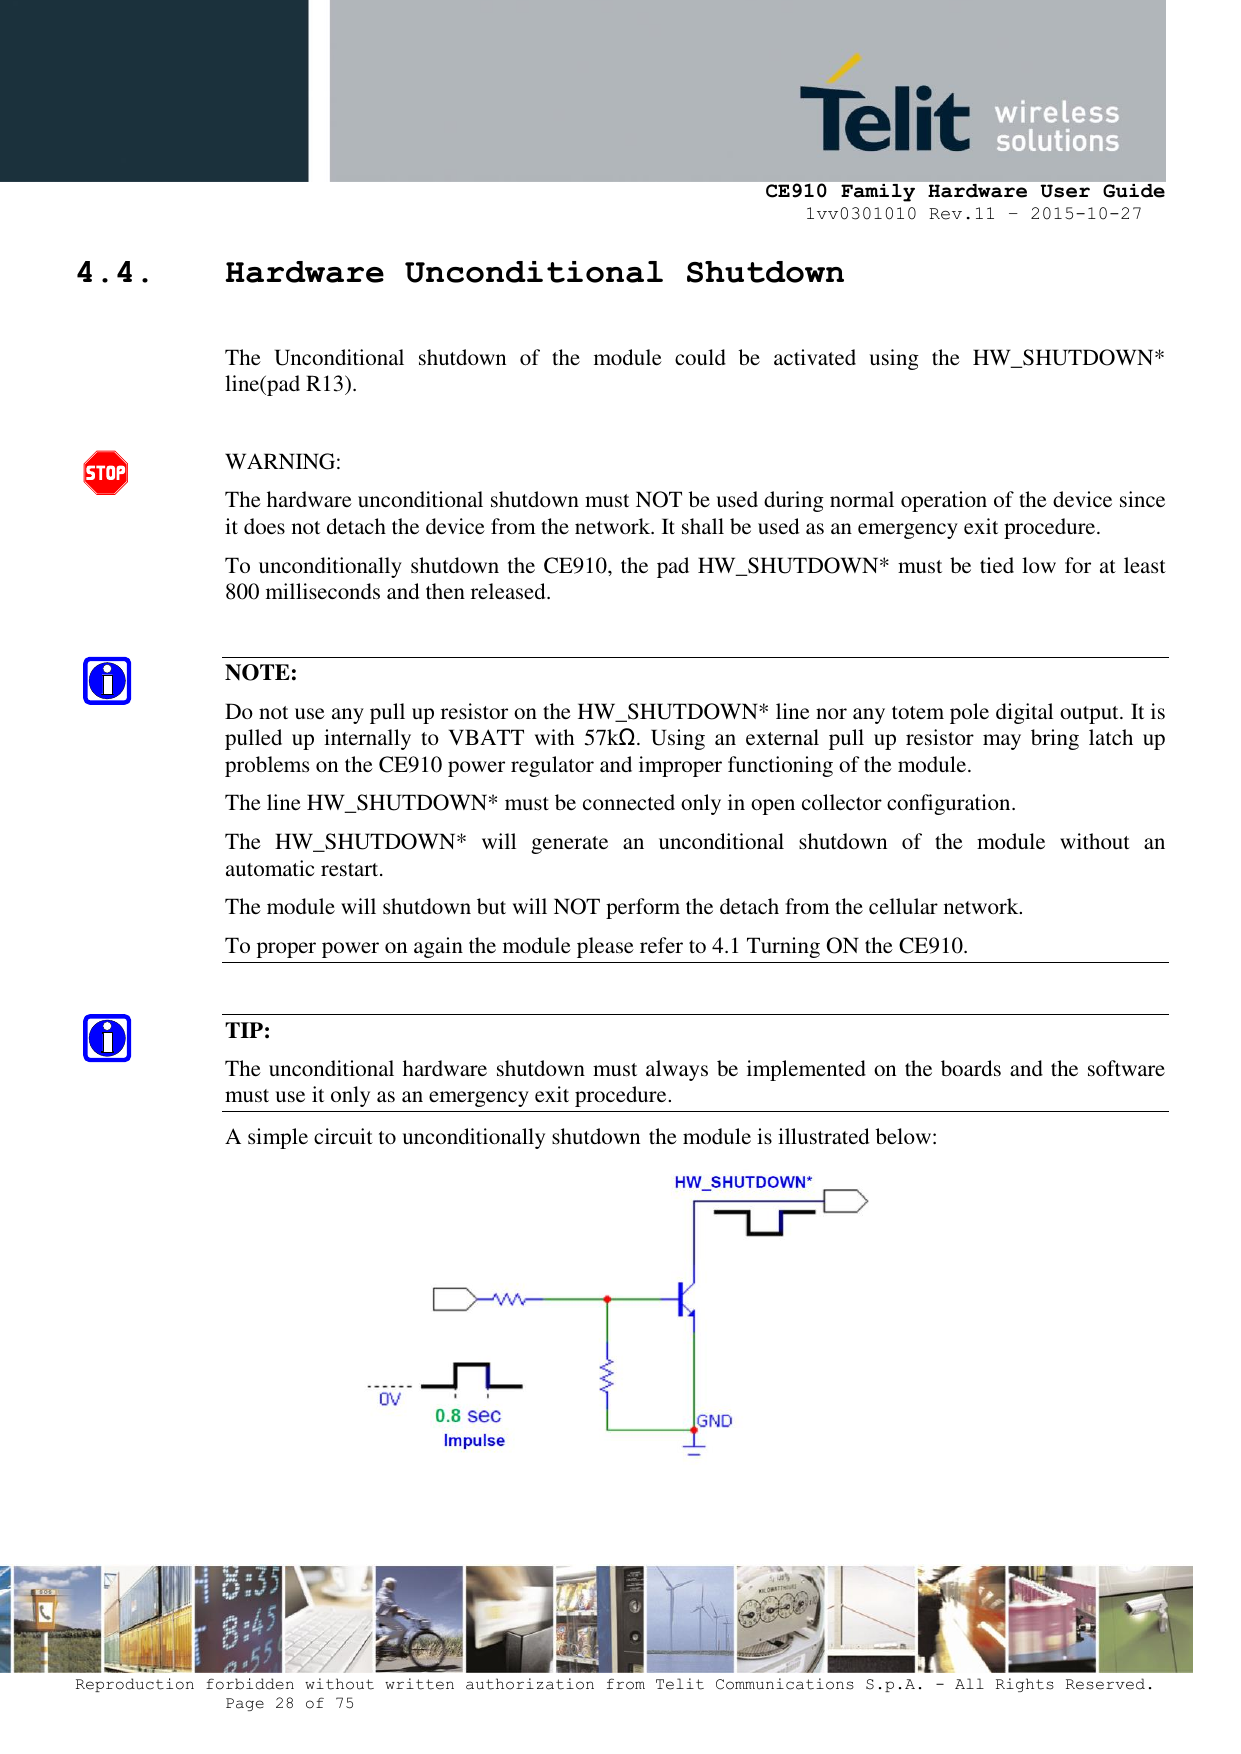     CE910 Family Hardware User Guide 1vv0301010 Rev.11 – 2015-10-27 Reproduction forbidden without written authorization from Telit Communications S.p.A. - All Rights Reserved.    Page 28 of 75                                                     4.4. Hardware Unconditional Shutdown  The  Unconditional  shutdown  of  the  module  could  be  activated  using  the  HW_SHUTDOWN* line(pad R13).  WARNING: The hardware unconditional shutdown must NOT be used during normal operation of the device since it does not detach the device from the network. It shall be used as an emergency exit procedure. To unconditionally shutdown the CE910, the pad HW_SHUTDOWN* must be tied low for at least 800 milliseconds and then released.  NOTE: Do not use any pull up resistor on the HW_SHUTDOWN* line nor any totem pole digital output. It is pulled up  internally  to VBATT  with  57kΩ. Using  an  external pull  up  resistor  may bring  latch  up problems on the CE910 power regulator and improper functioning of the module.  The line HW_SHUTDOWN* must be connected only in open collector configuration. The  HW_SHUTDOWN*  will  generate  an  unconditional  shutdown  of  the  module  without  an automatic restart. The module will shutdown but will NOT perform the detach from the cellular network. To proper power on again the module please refer to 4.1 Turning ON the CE910.  TIP: The unconditional hardware shutdown must always be implemented on the boards and the software must use it only as an emergency exit procedure. A simple circuit to unconditionally shutdown the module is illustrated below:   